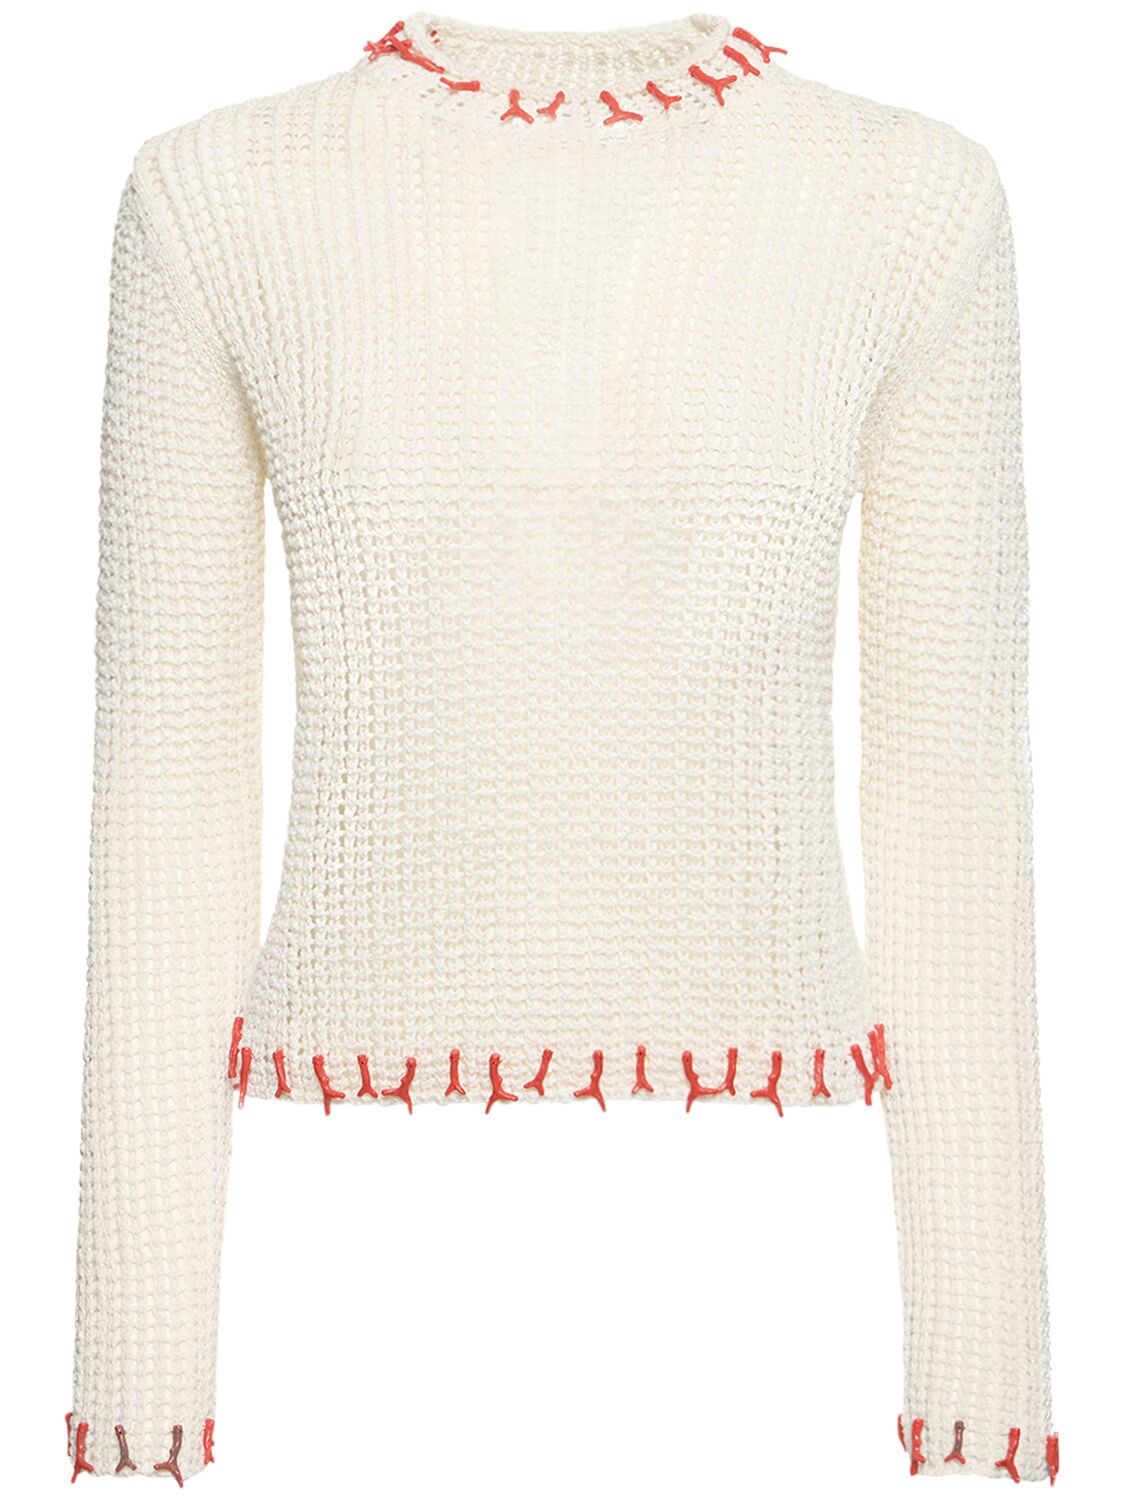 Reina Olga Contrasting-charms Open-knit Jumper In White